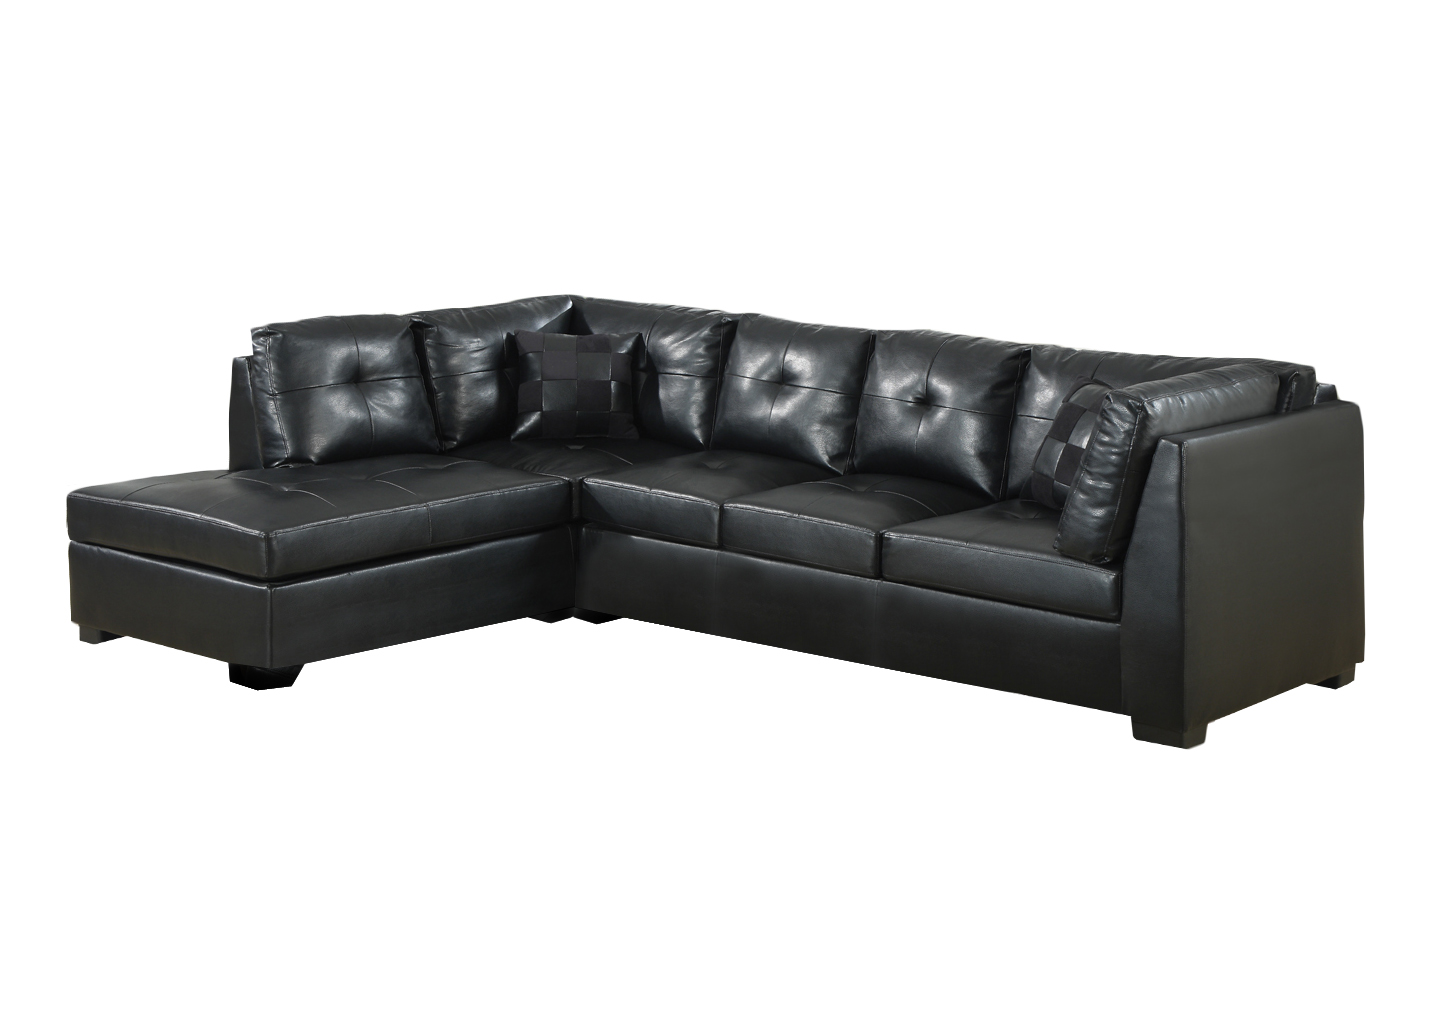 SOFA - SECTIONAL / BLACK BONDED LEATHER / MATCH